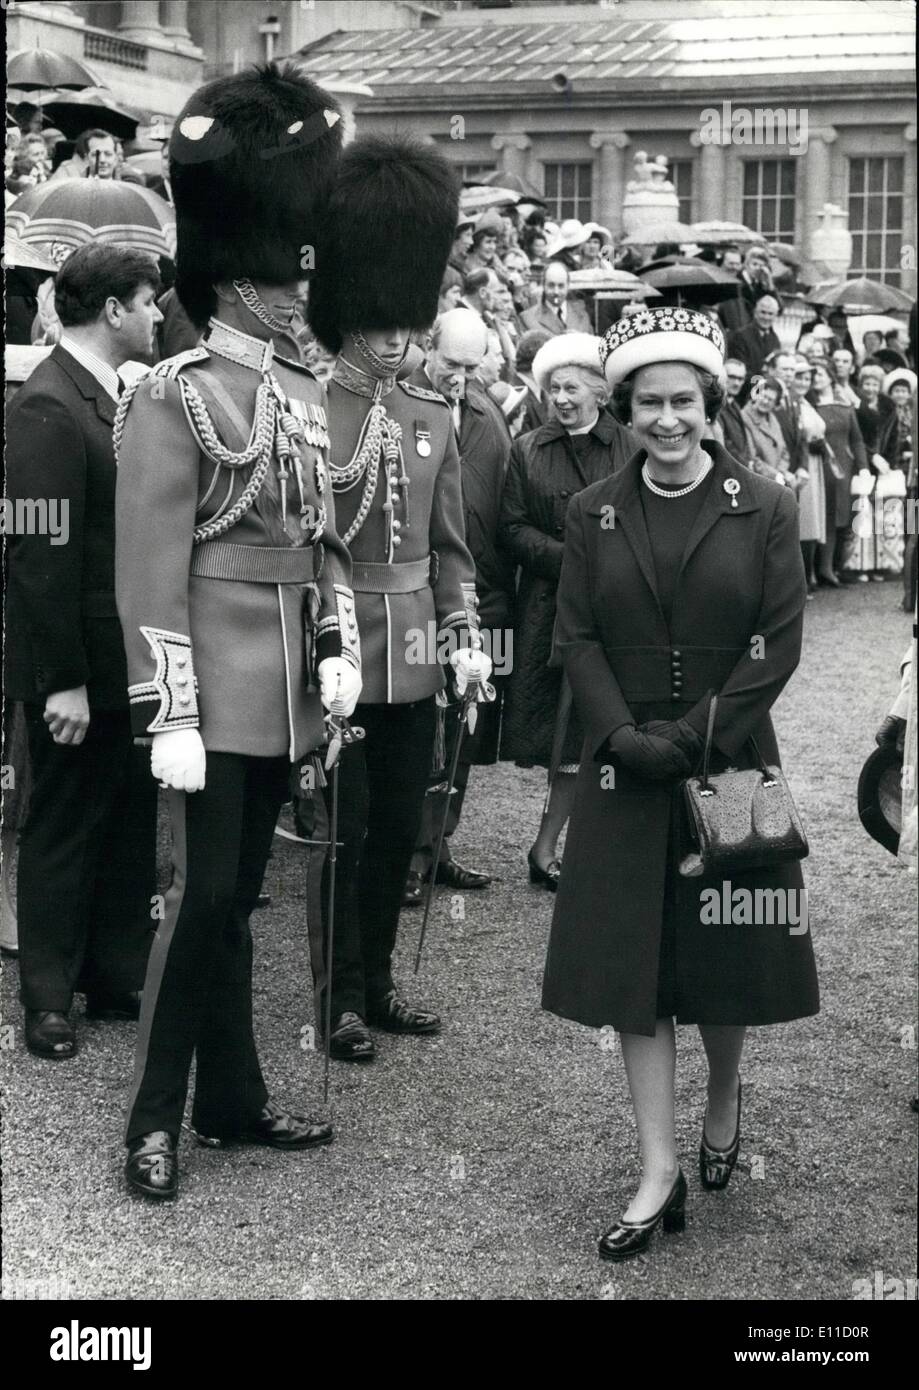 Apr. 04, 1977 - The Queen Presents New Colors to the First Battalion Scots Guards. This morning in Buckingham Palace Gardens the Queen presented new colors to the First Battalion Scots Guards of which she is Colonel in Chief of the Regiment. Photo shows The Queen seen leaving the parade after presenting the new colors , on the left is the Duke of Kent. Stock Photo